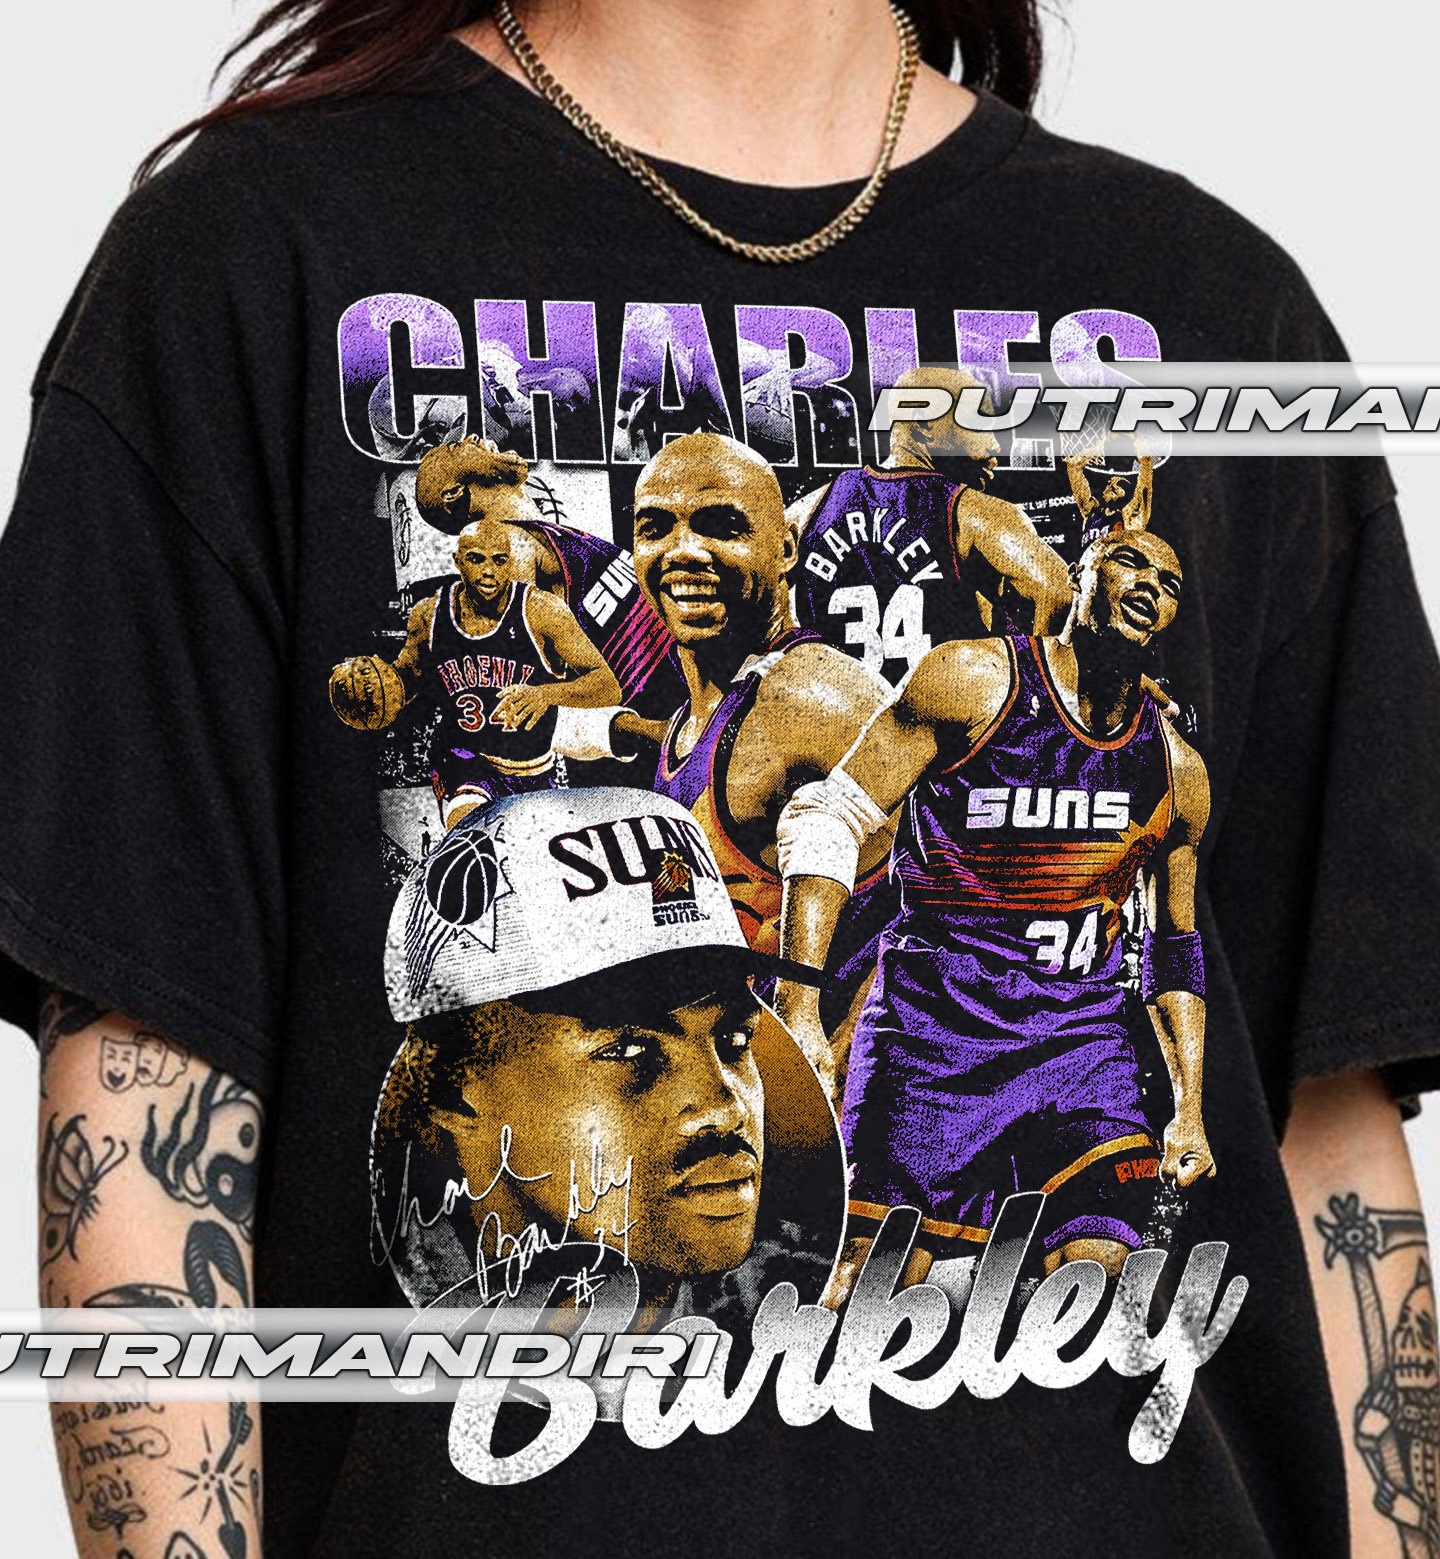 Vintage 90s Graphic Style Charles Barkley T-Shirt, PHX Charles Barkley  Shirt, Vintage Oversized Sport Tee, Retro Basketball Bootleg Gifts